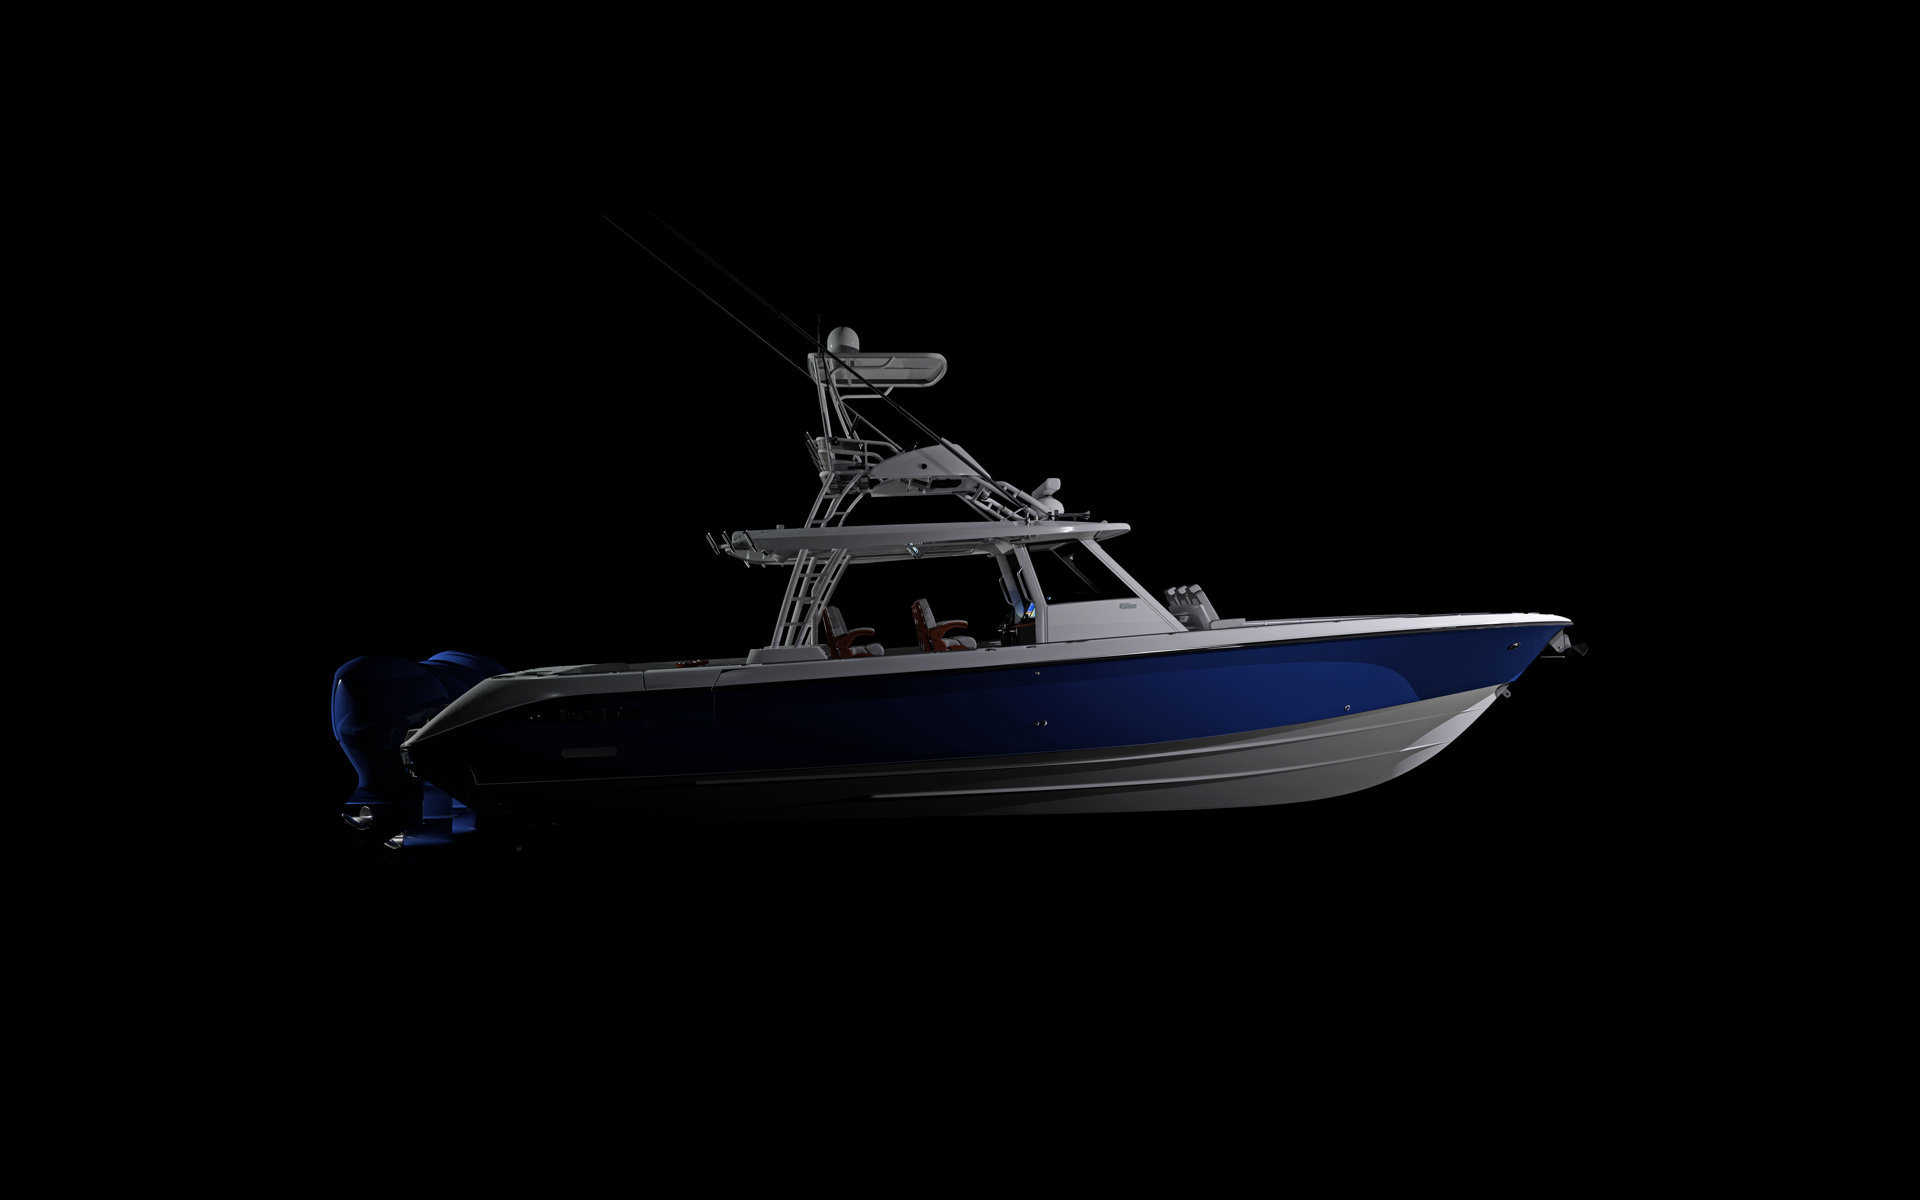 360 VR Virtual Tours of the Everglades 455 Center Console